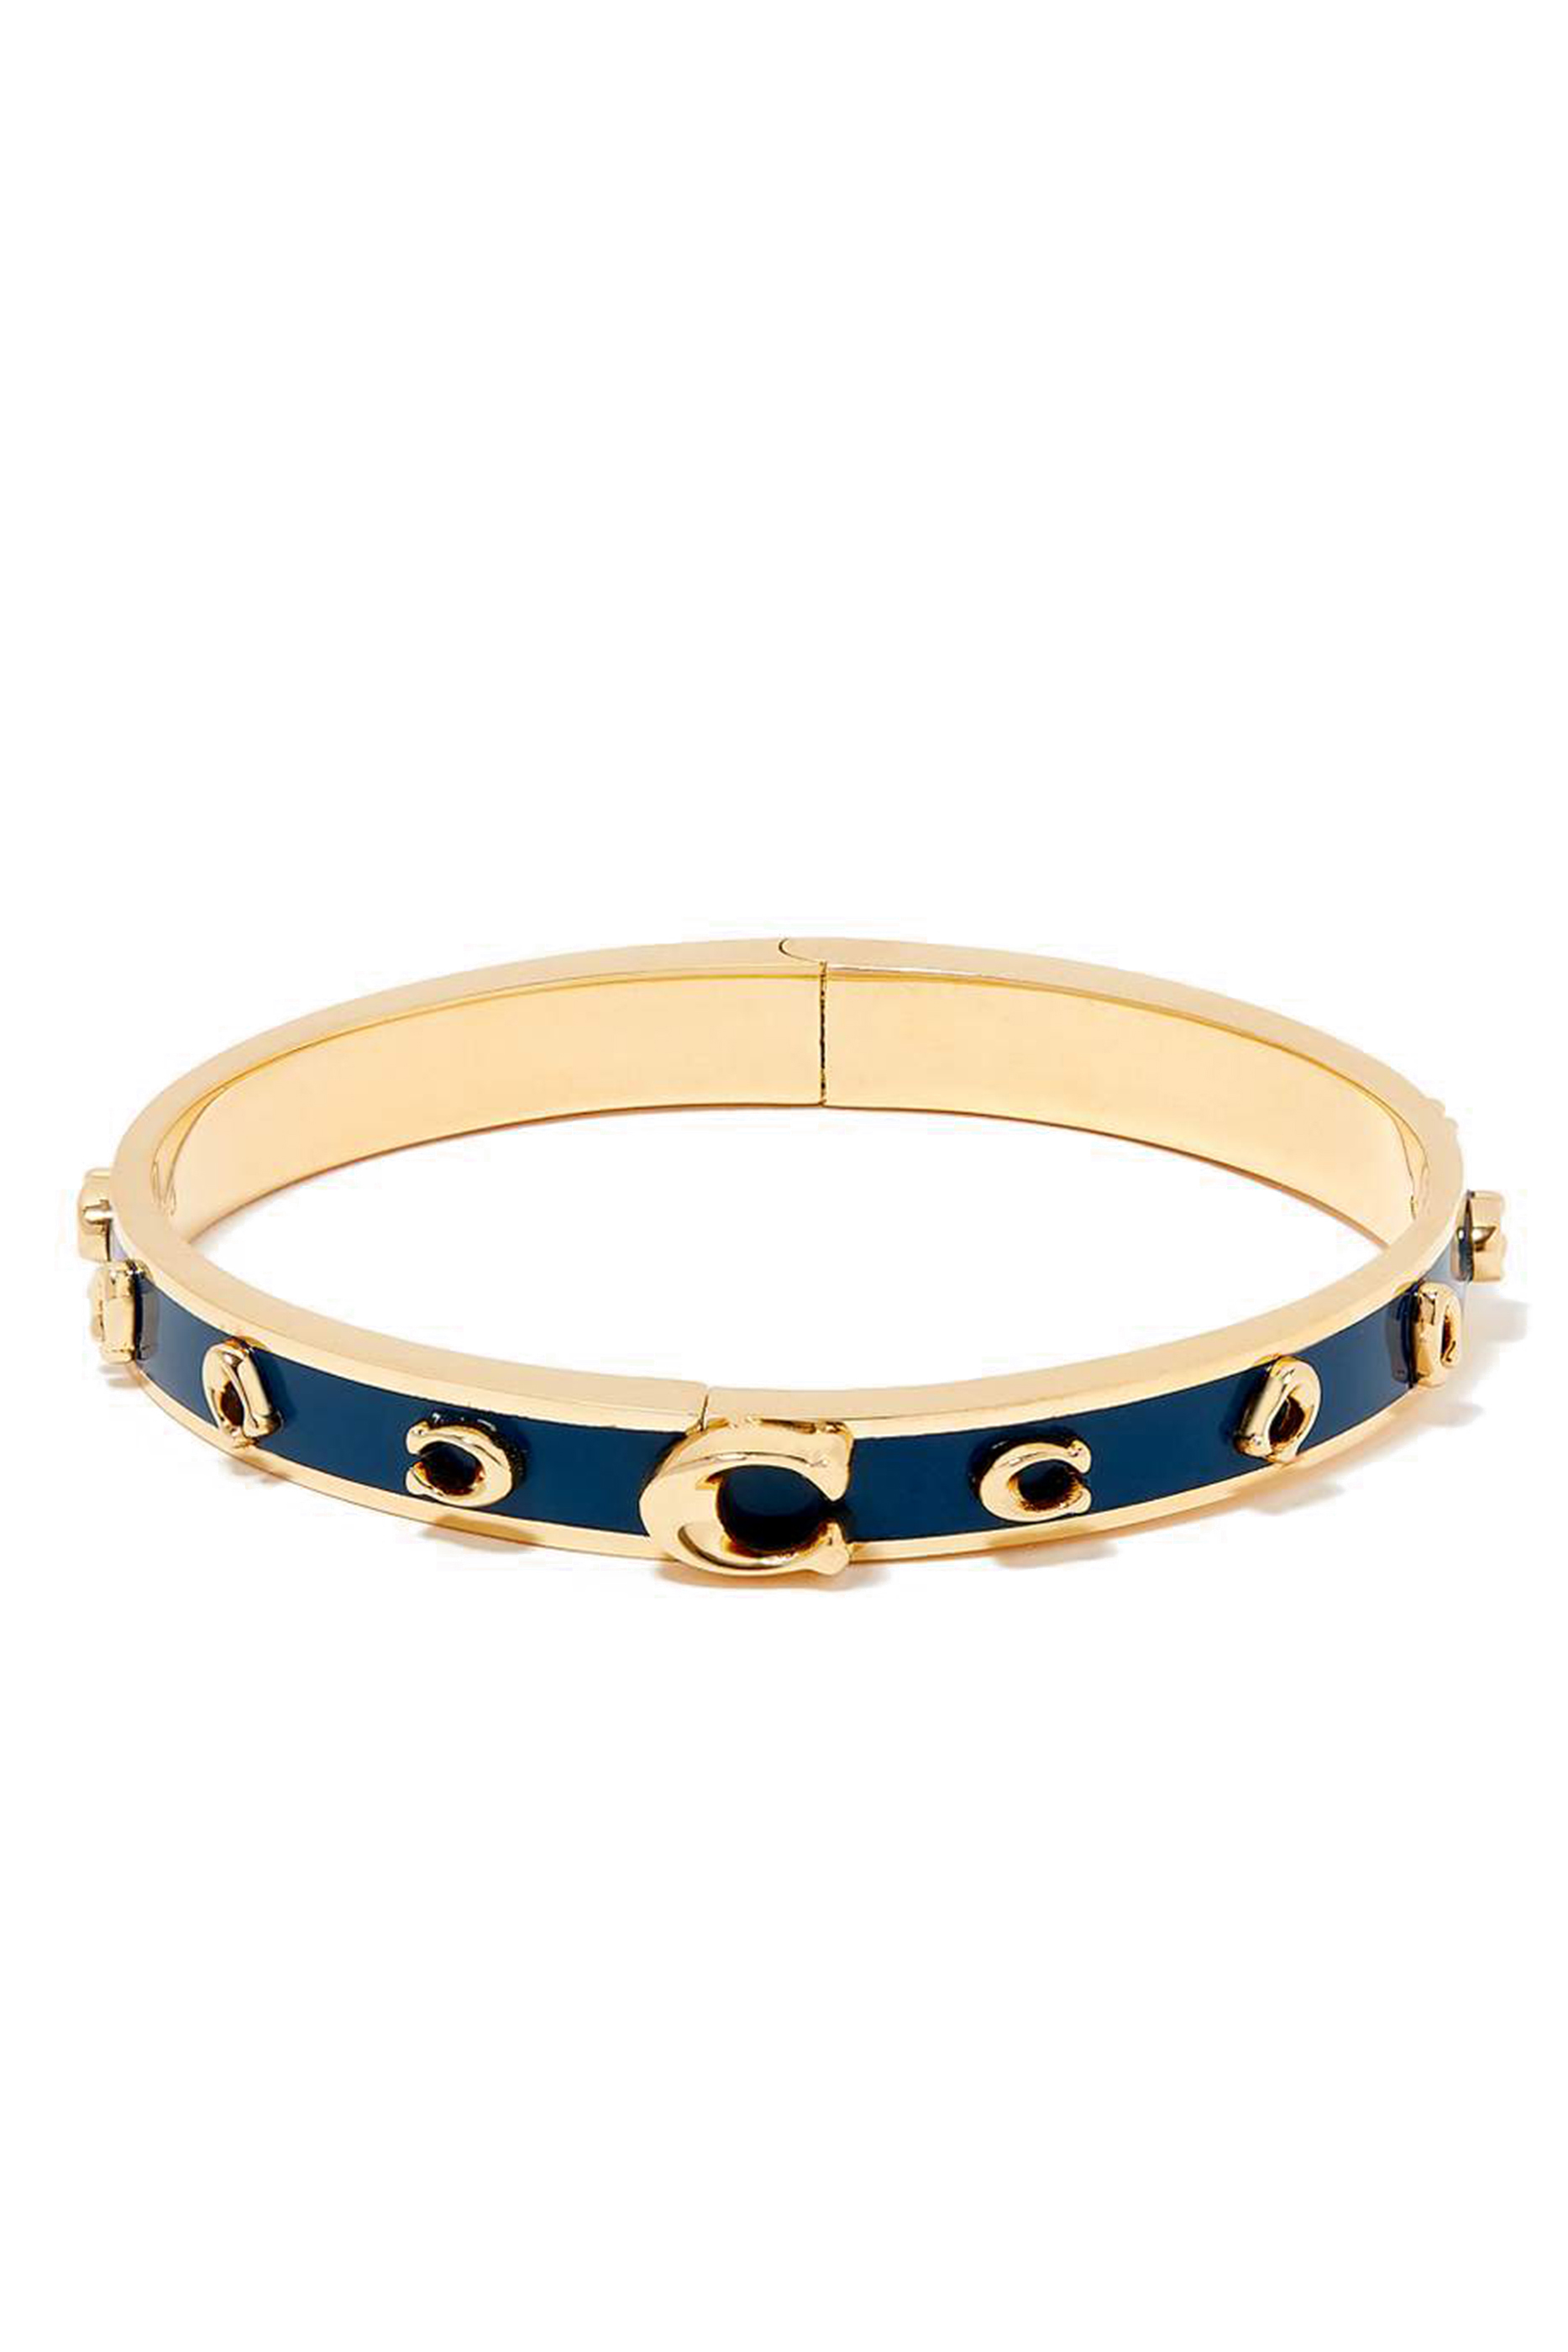 Buy Coach Pegged Signature Bangle for Womens | Bloomingdale's Kuwait